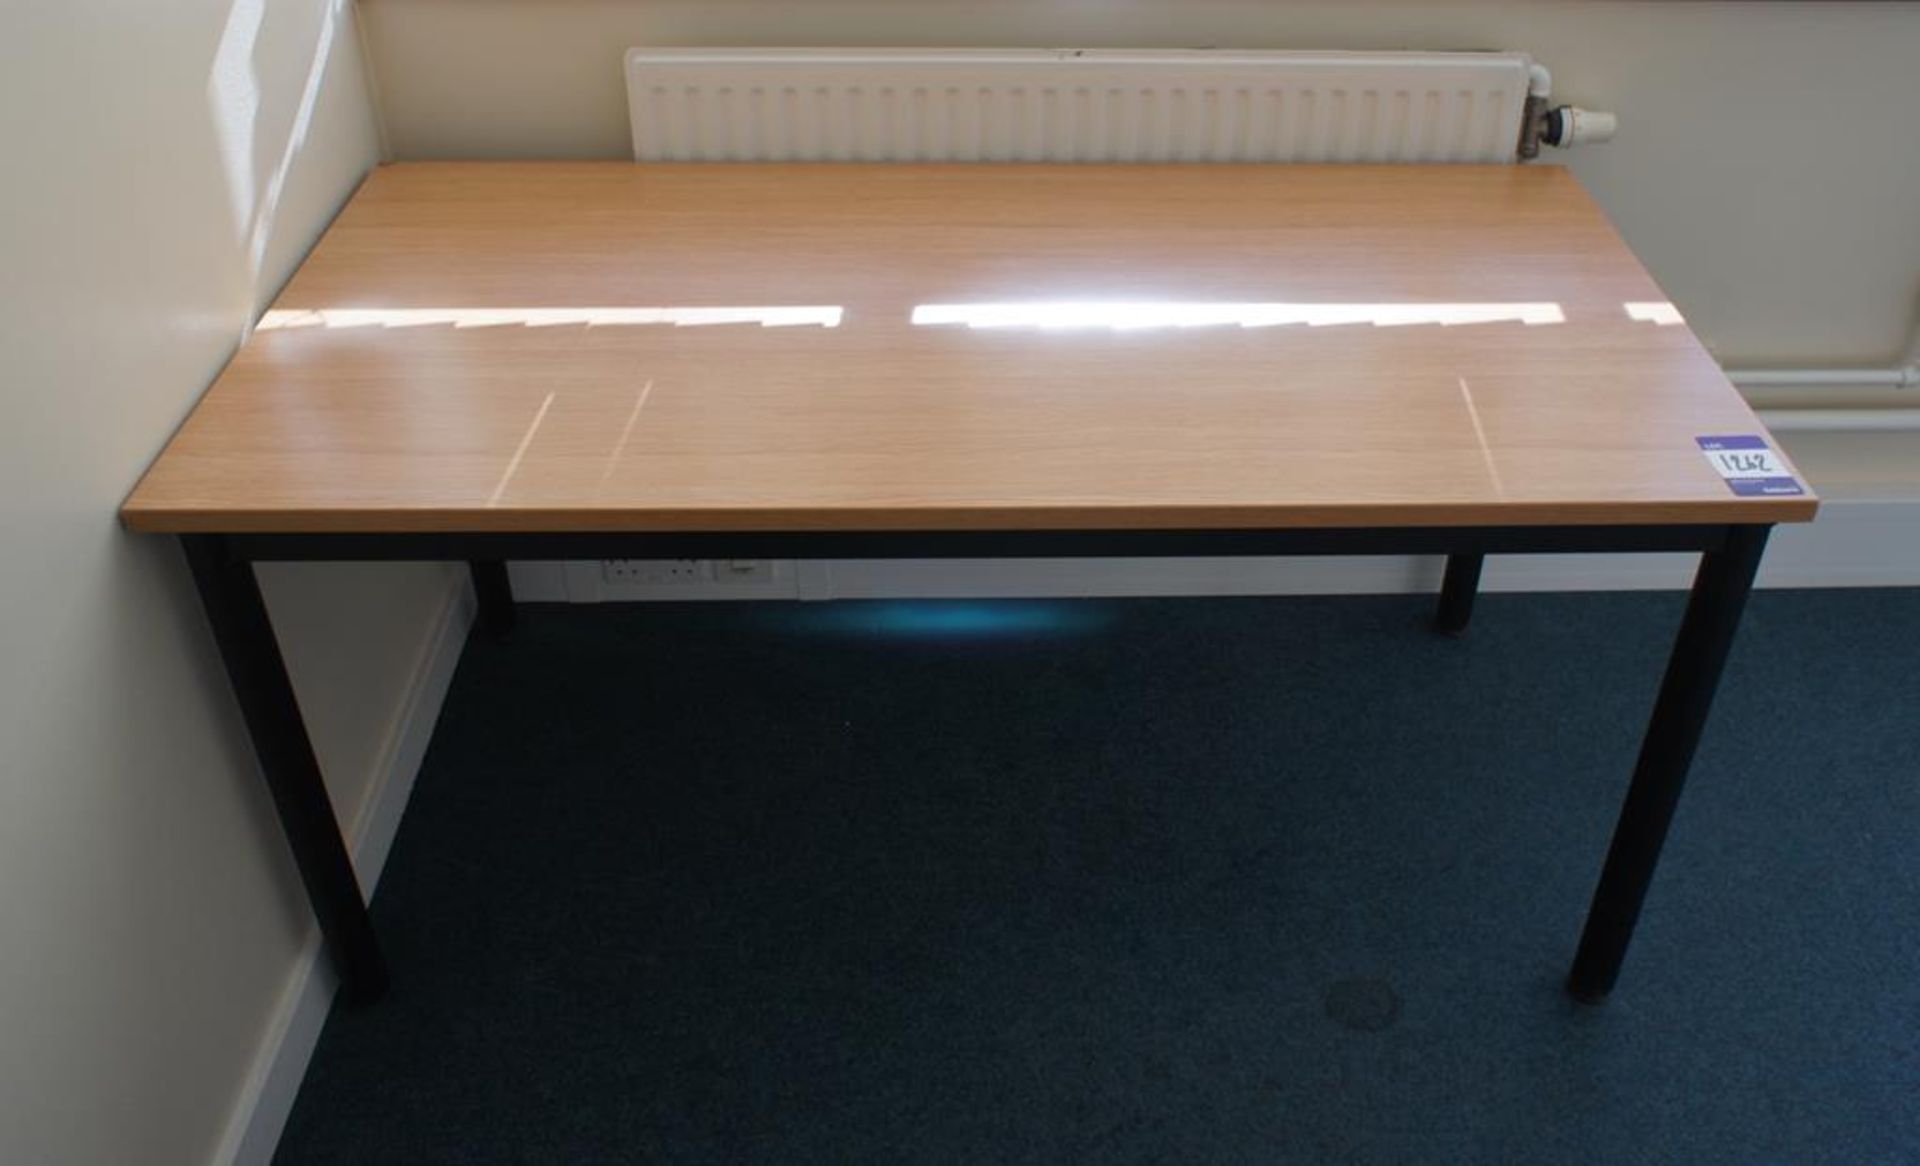 * 2 x Oak Effect Office Tables 1500 x 750 Photographs are provided for example purposes only and